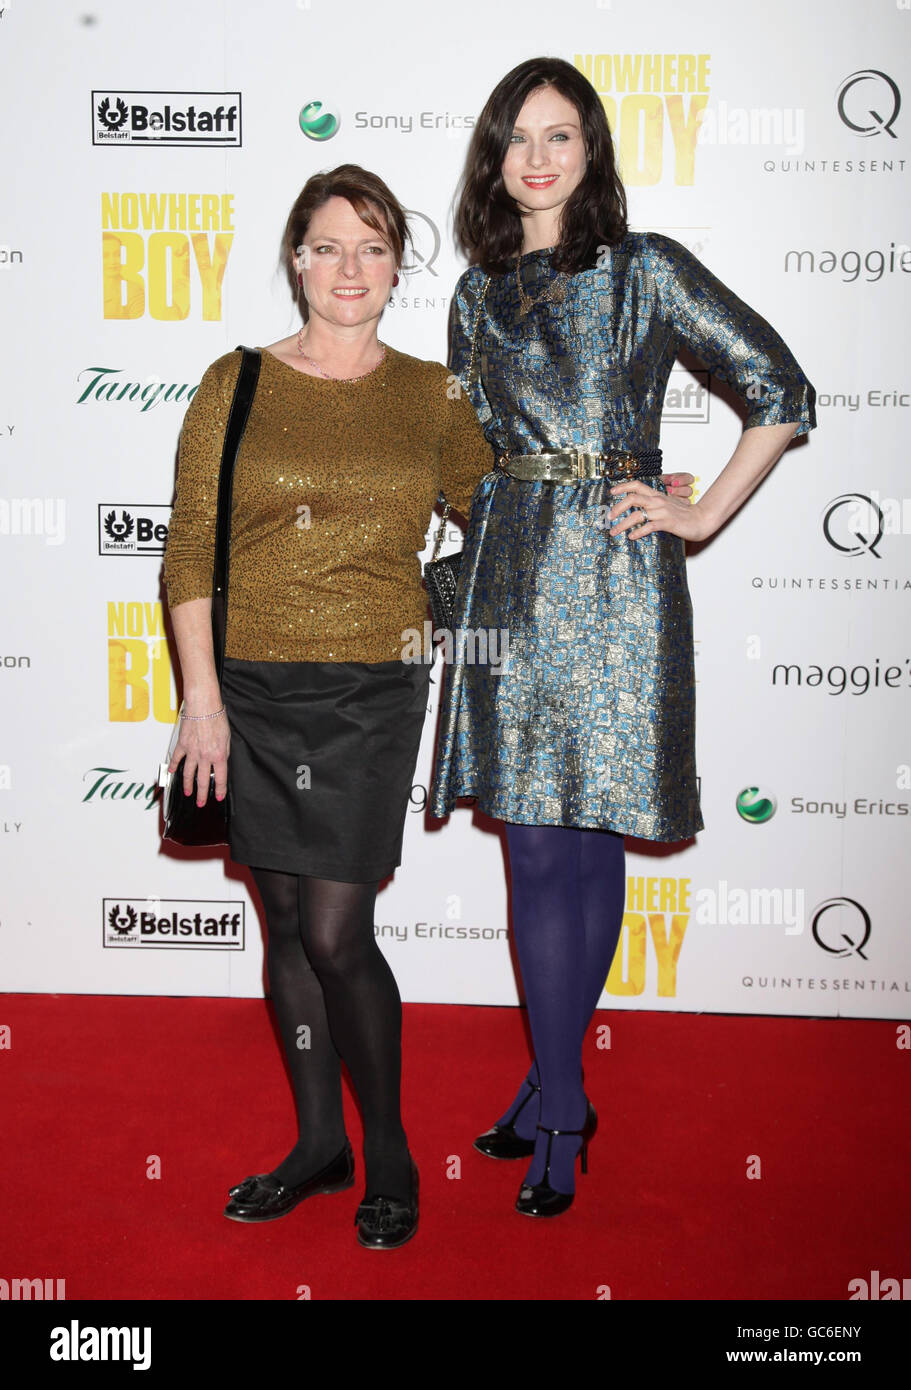 Janet Ellis (left) and Sophie Ellis Bextor arrive for the charity premiere of Nowhere Boy, hosted by Quintessentially, at BAFTA in Piccadilly, London. Stock Photo